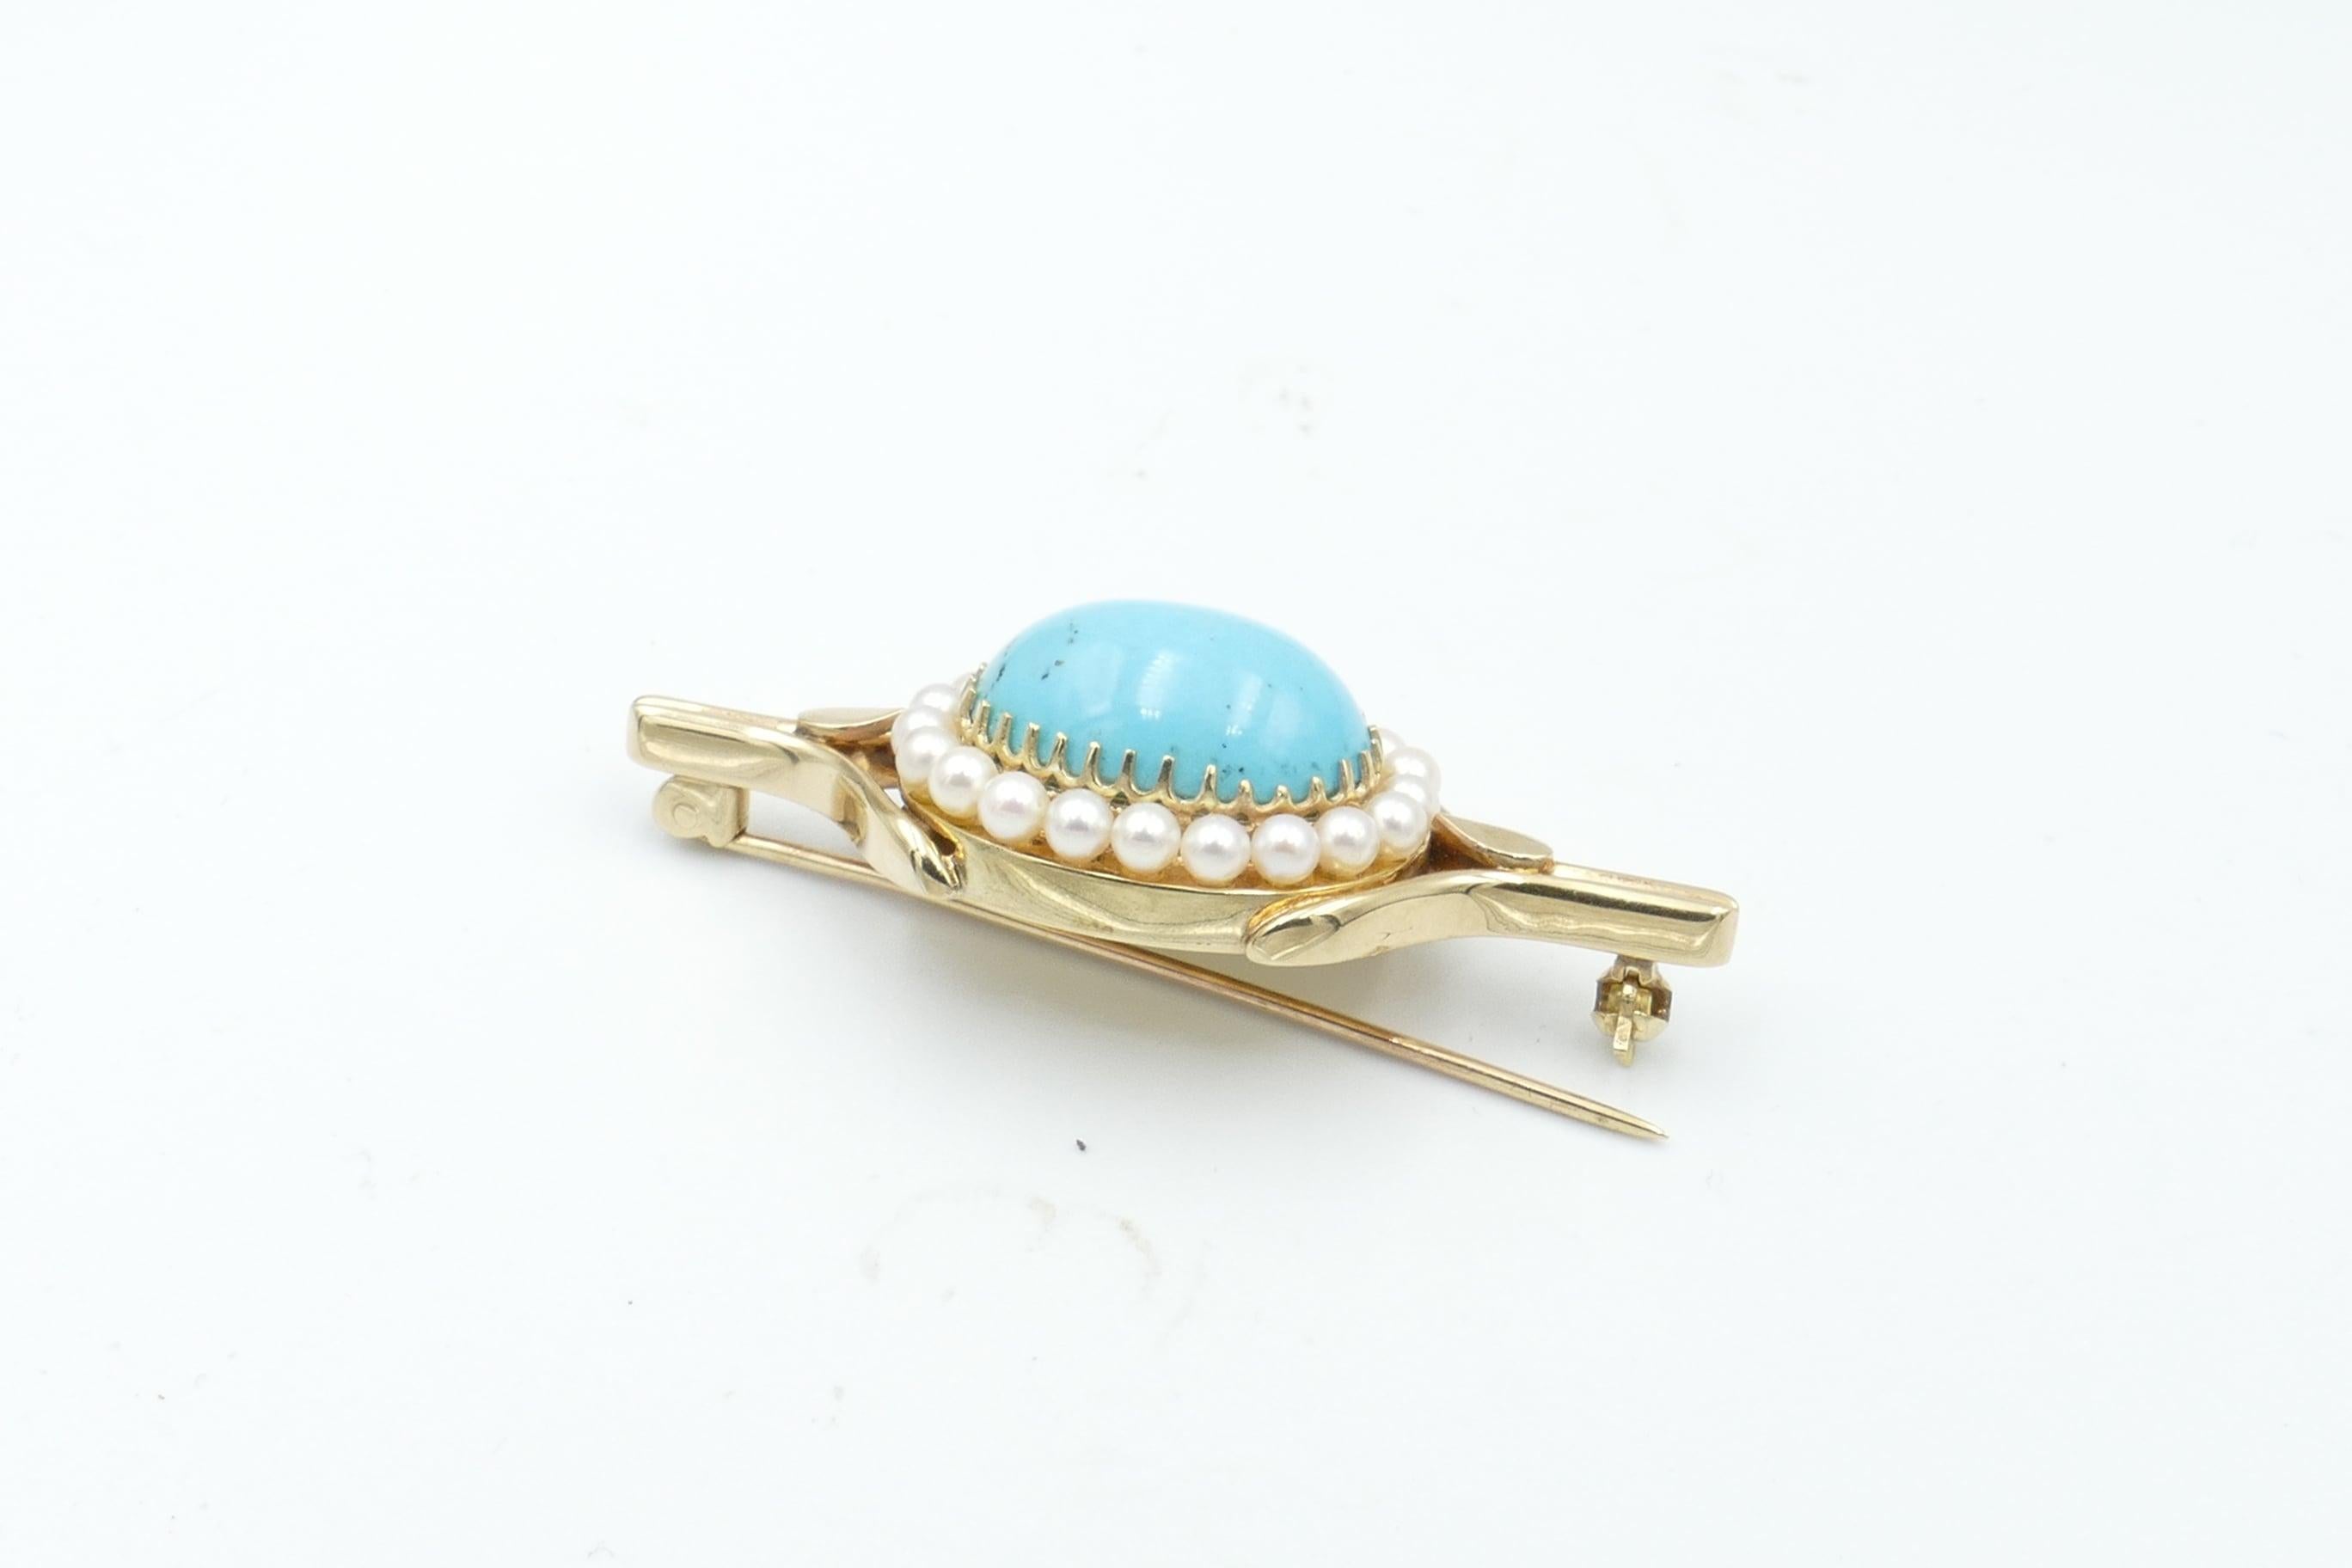 Antique 15.39 Carat Turquoise and Pearl 9 Carat Yellow Gold Brooch In Good Condition For Sale In Splitter's Creek, NSW